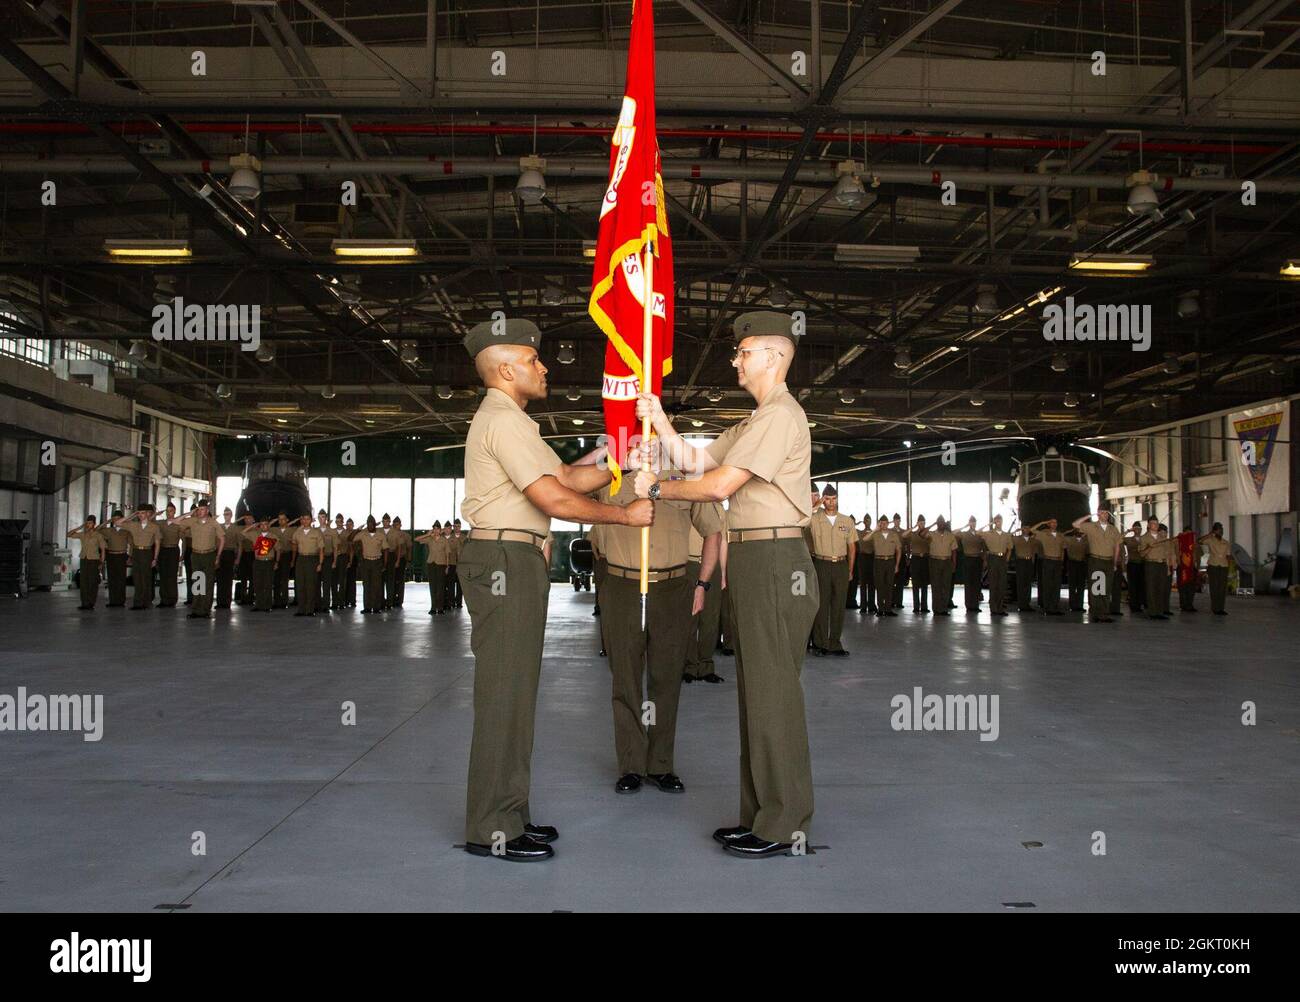 U.S. Marine Corps Lt. Col. John L. Roach (Right), Security Battalion’s commanding officer, passes the colors to Lt. Col. David S. Rainey during Security Battalion’s change of command ceremony at Marine Corps Base Quantico, Virginia. June 25, 2021. Lt. Col. John L. Roach relinquishes all duties and responsibilities to Lt. Col. David S. Rainey.  Roach has been with Security Battalion since June 2019. Stock Photo